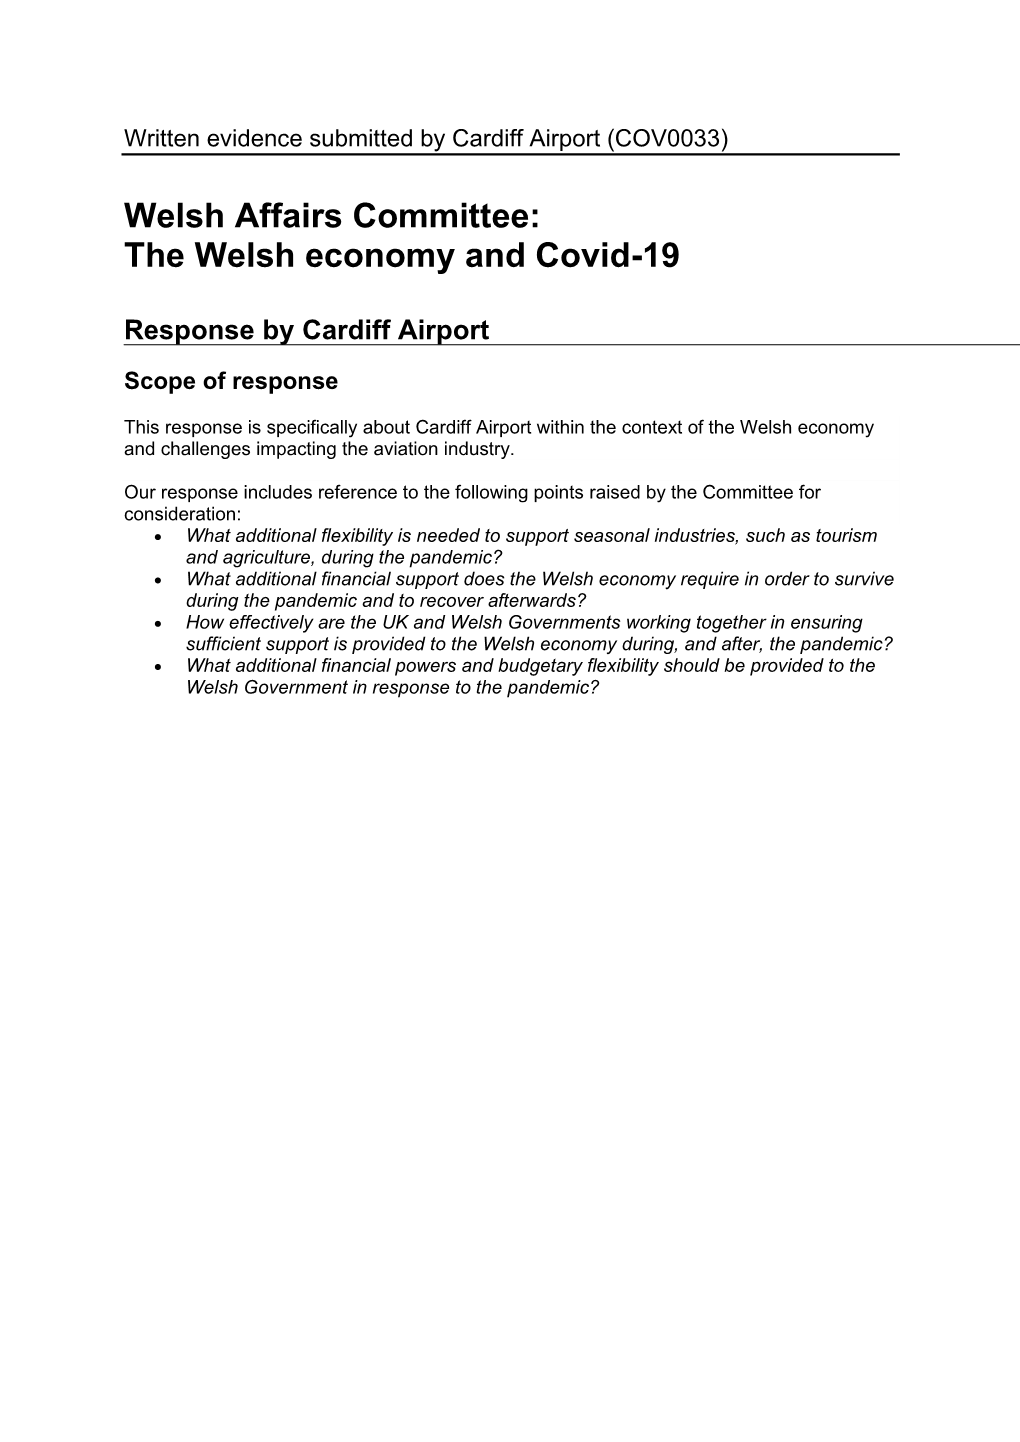 The Welsh Economy and Covid-19